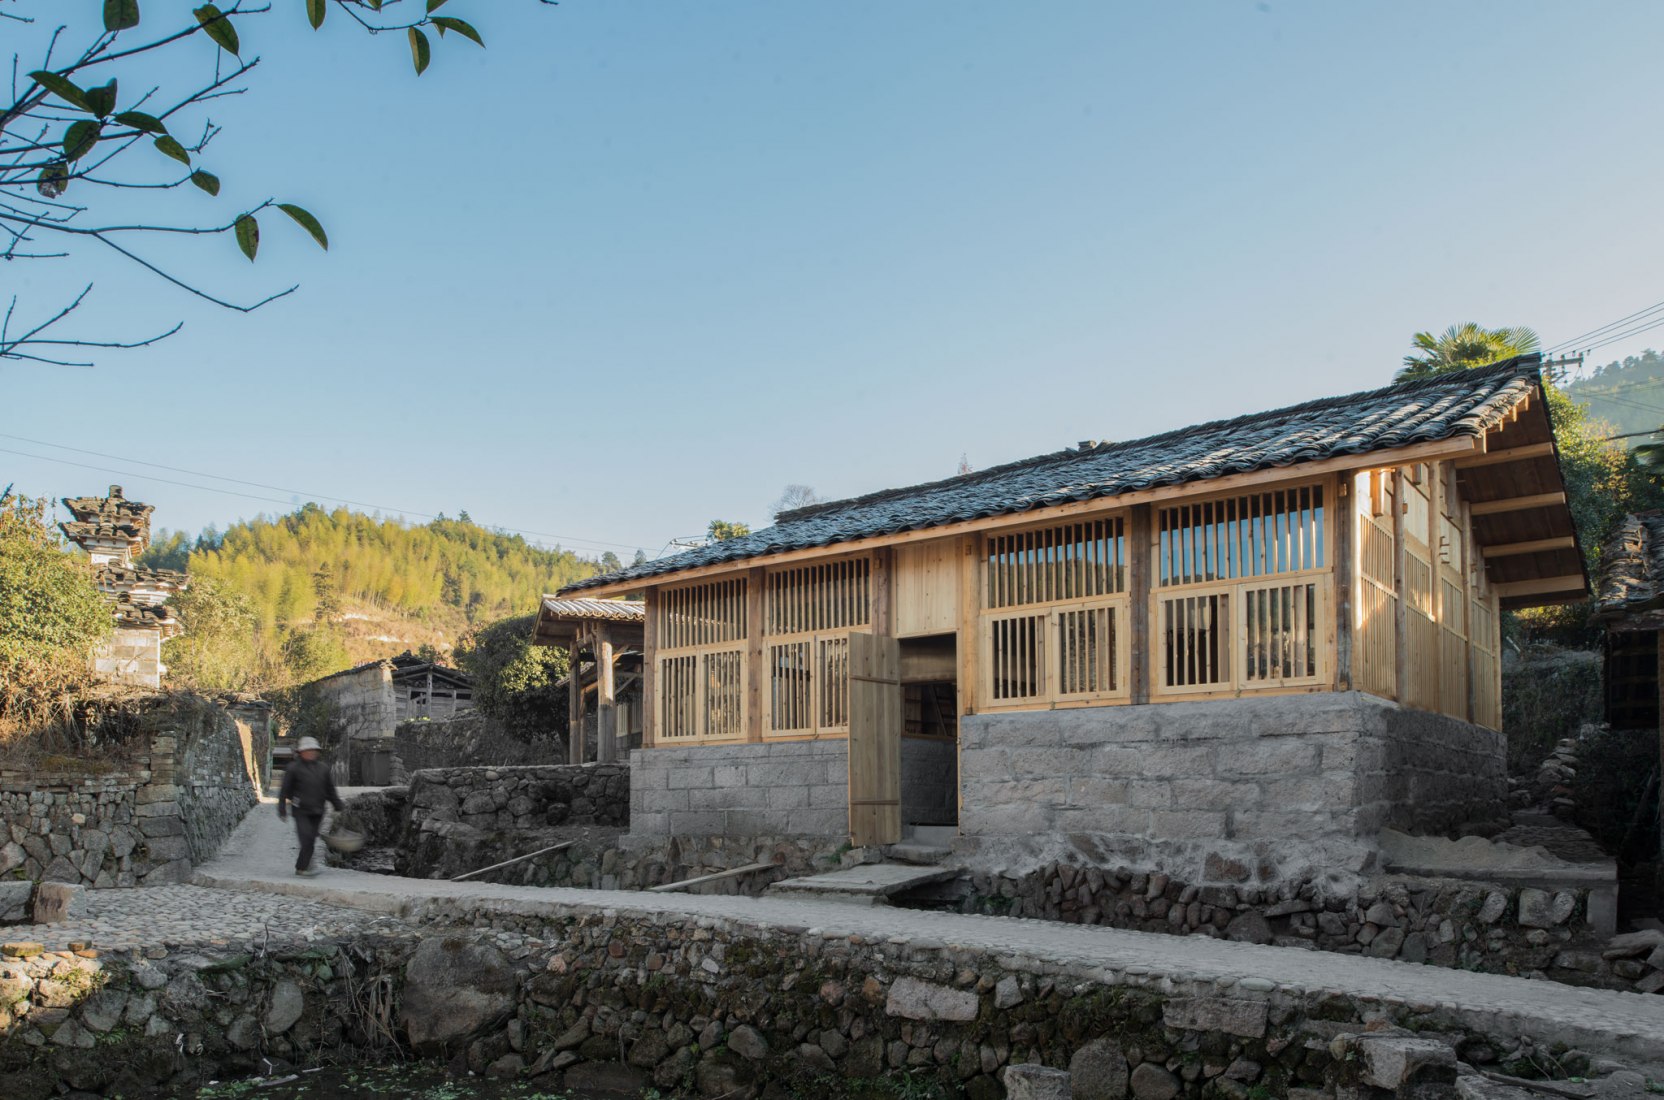 Exterior view of ‘Pigsty Bistro’. Shangping Village Regeneration - Tai Fu Tai Mansion Area by 3andwich Design / He Wei Studio. Photography © Meng Zhou